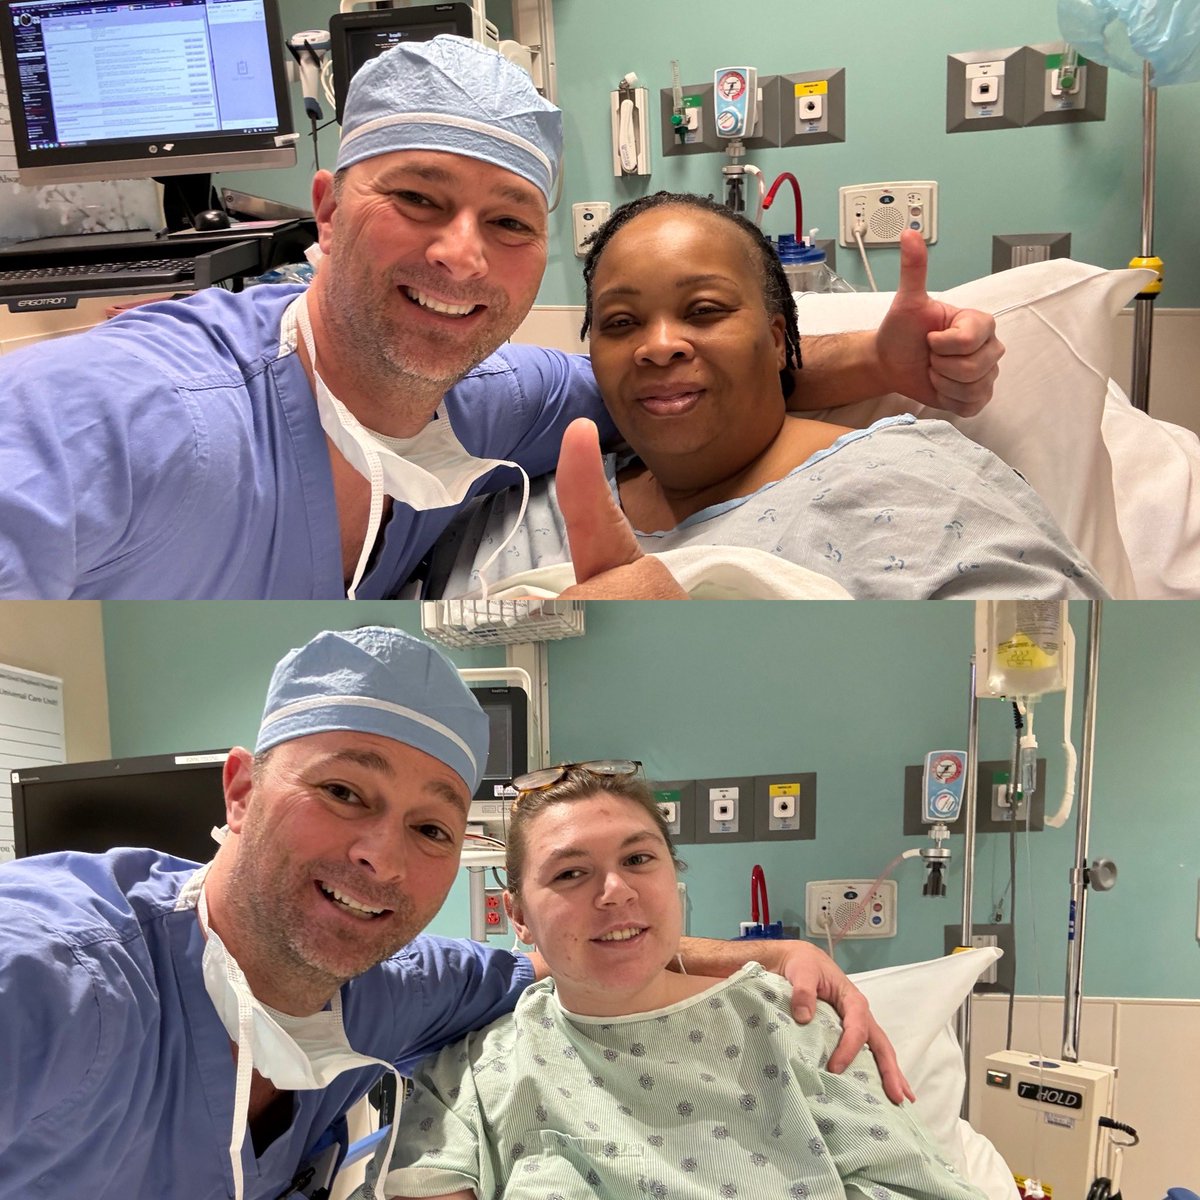 #barituesday = #transformationtuesday 

A total of 6 #strongwomen chose to #gethealthy & change their lives today! They understand #bariatricsurgery is NOT a #magicwand #teamcheregi will be #supporting them through their #wlsjourney @advbariatrics 

#rny #vsg #sadisurgery